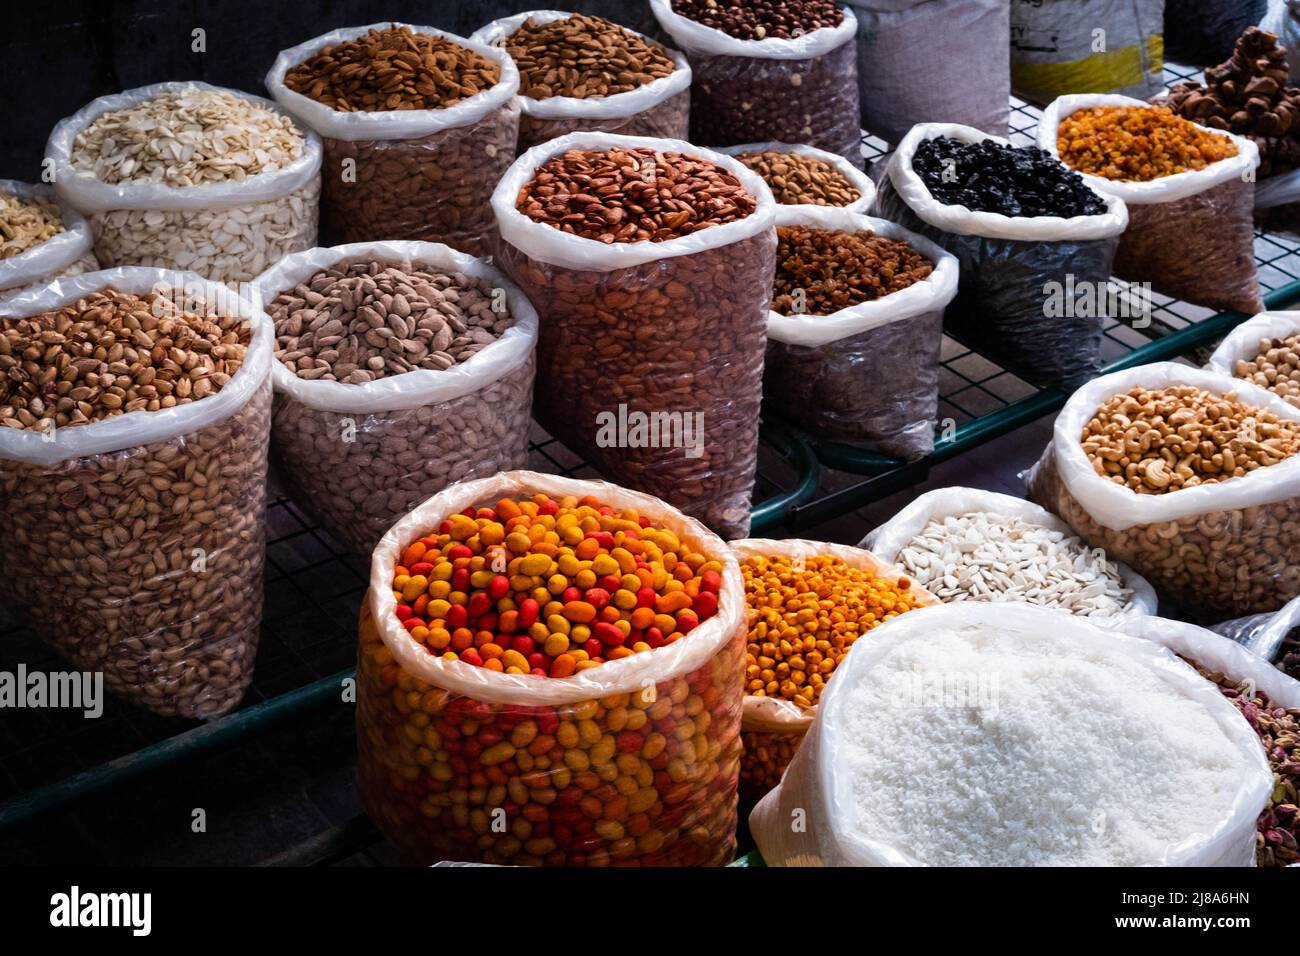 bags of nuts, seeds and ingredients on food market (Suq, Damascus) Stock Photo